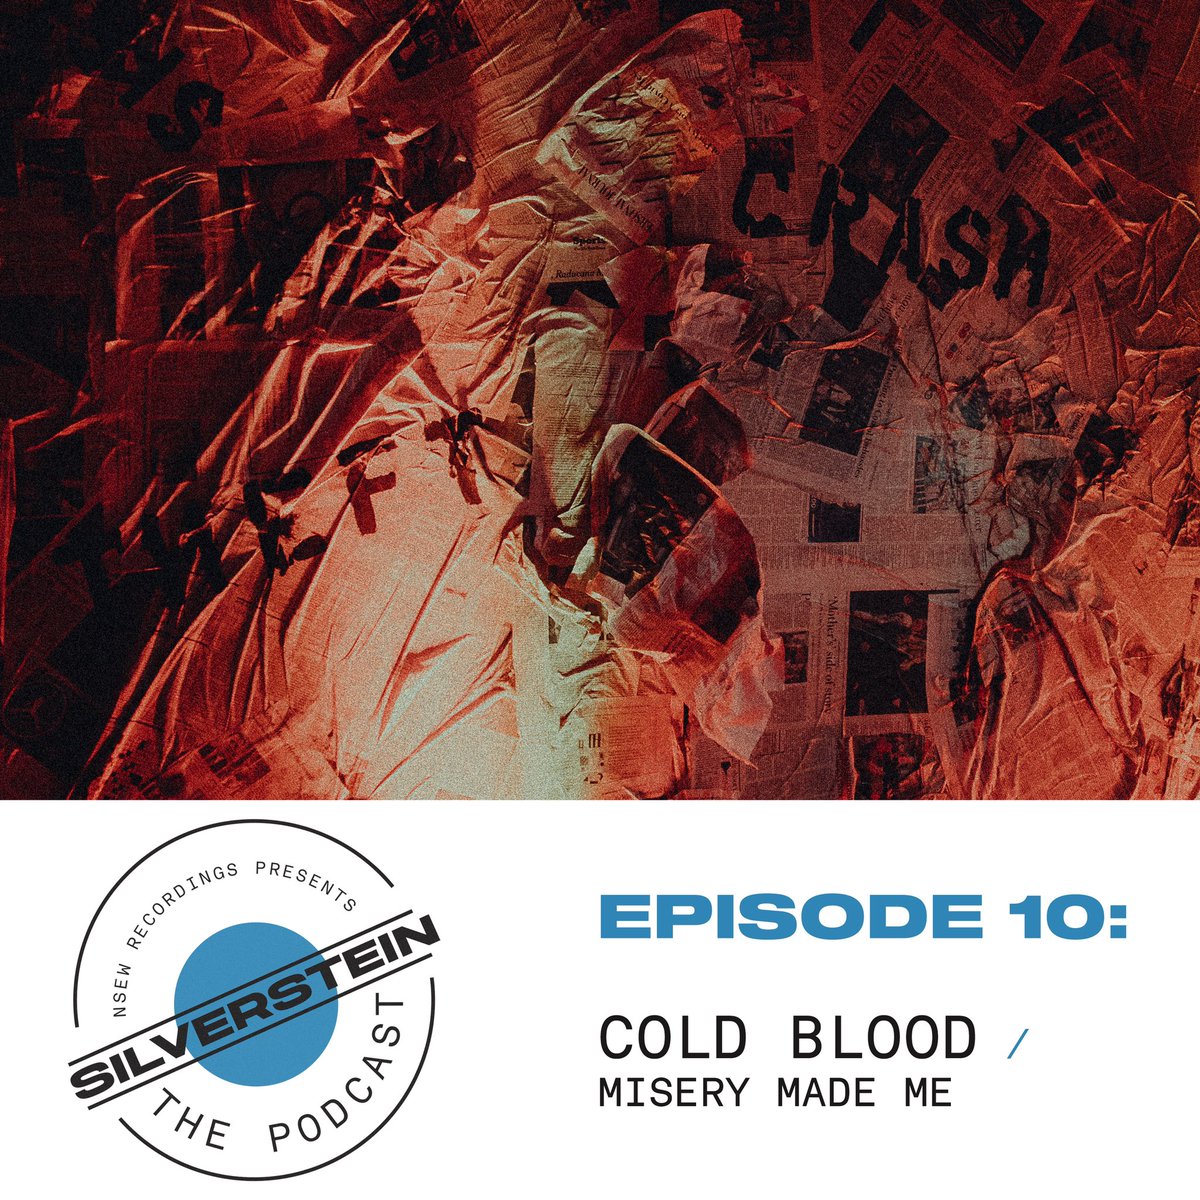 New episode of our Podcast discussing “Cold Blood” with special guest @Iamtrevordaniel out now! 🎙 cms.megaphone.fm/channel/LSS670…